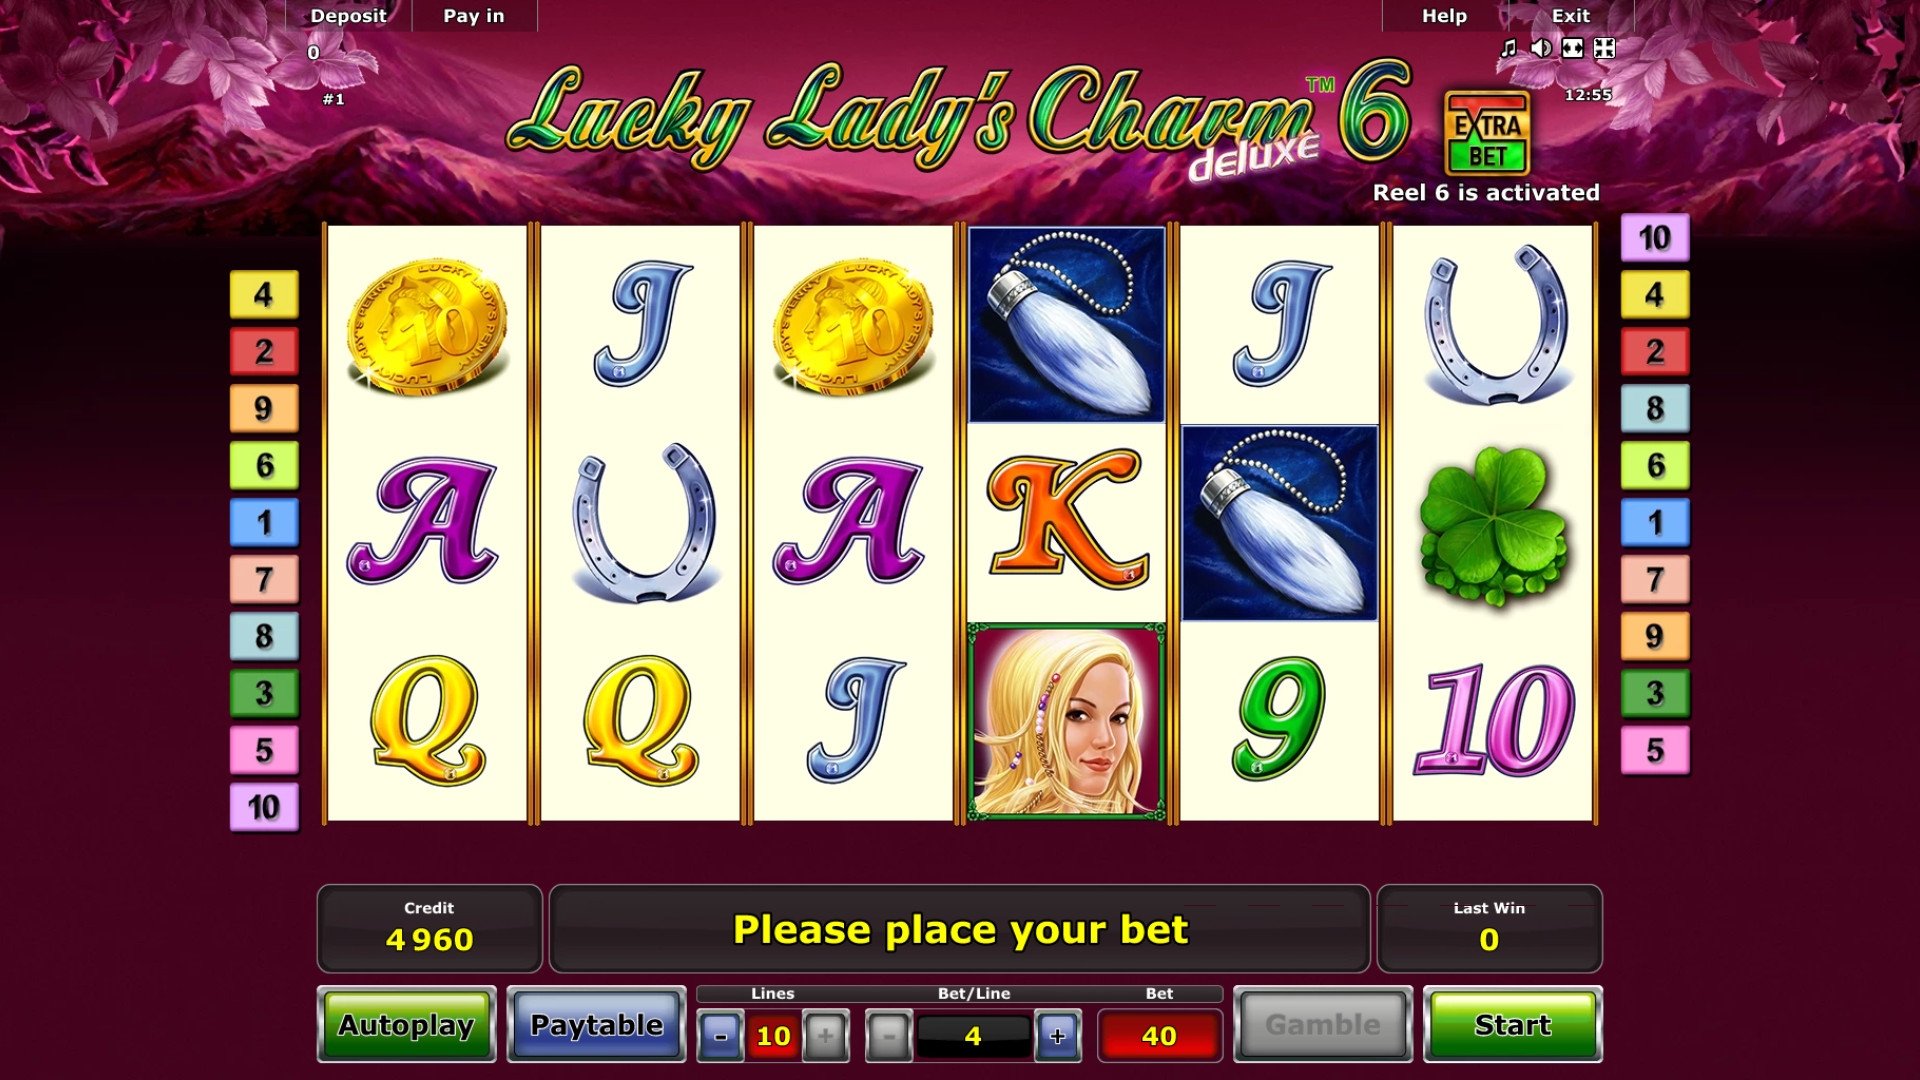 Highroller Lucky Lady’s Charm deluxe Free Online Slots free slots machines games no download 